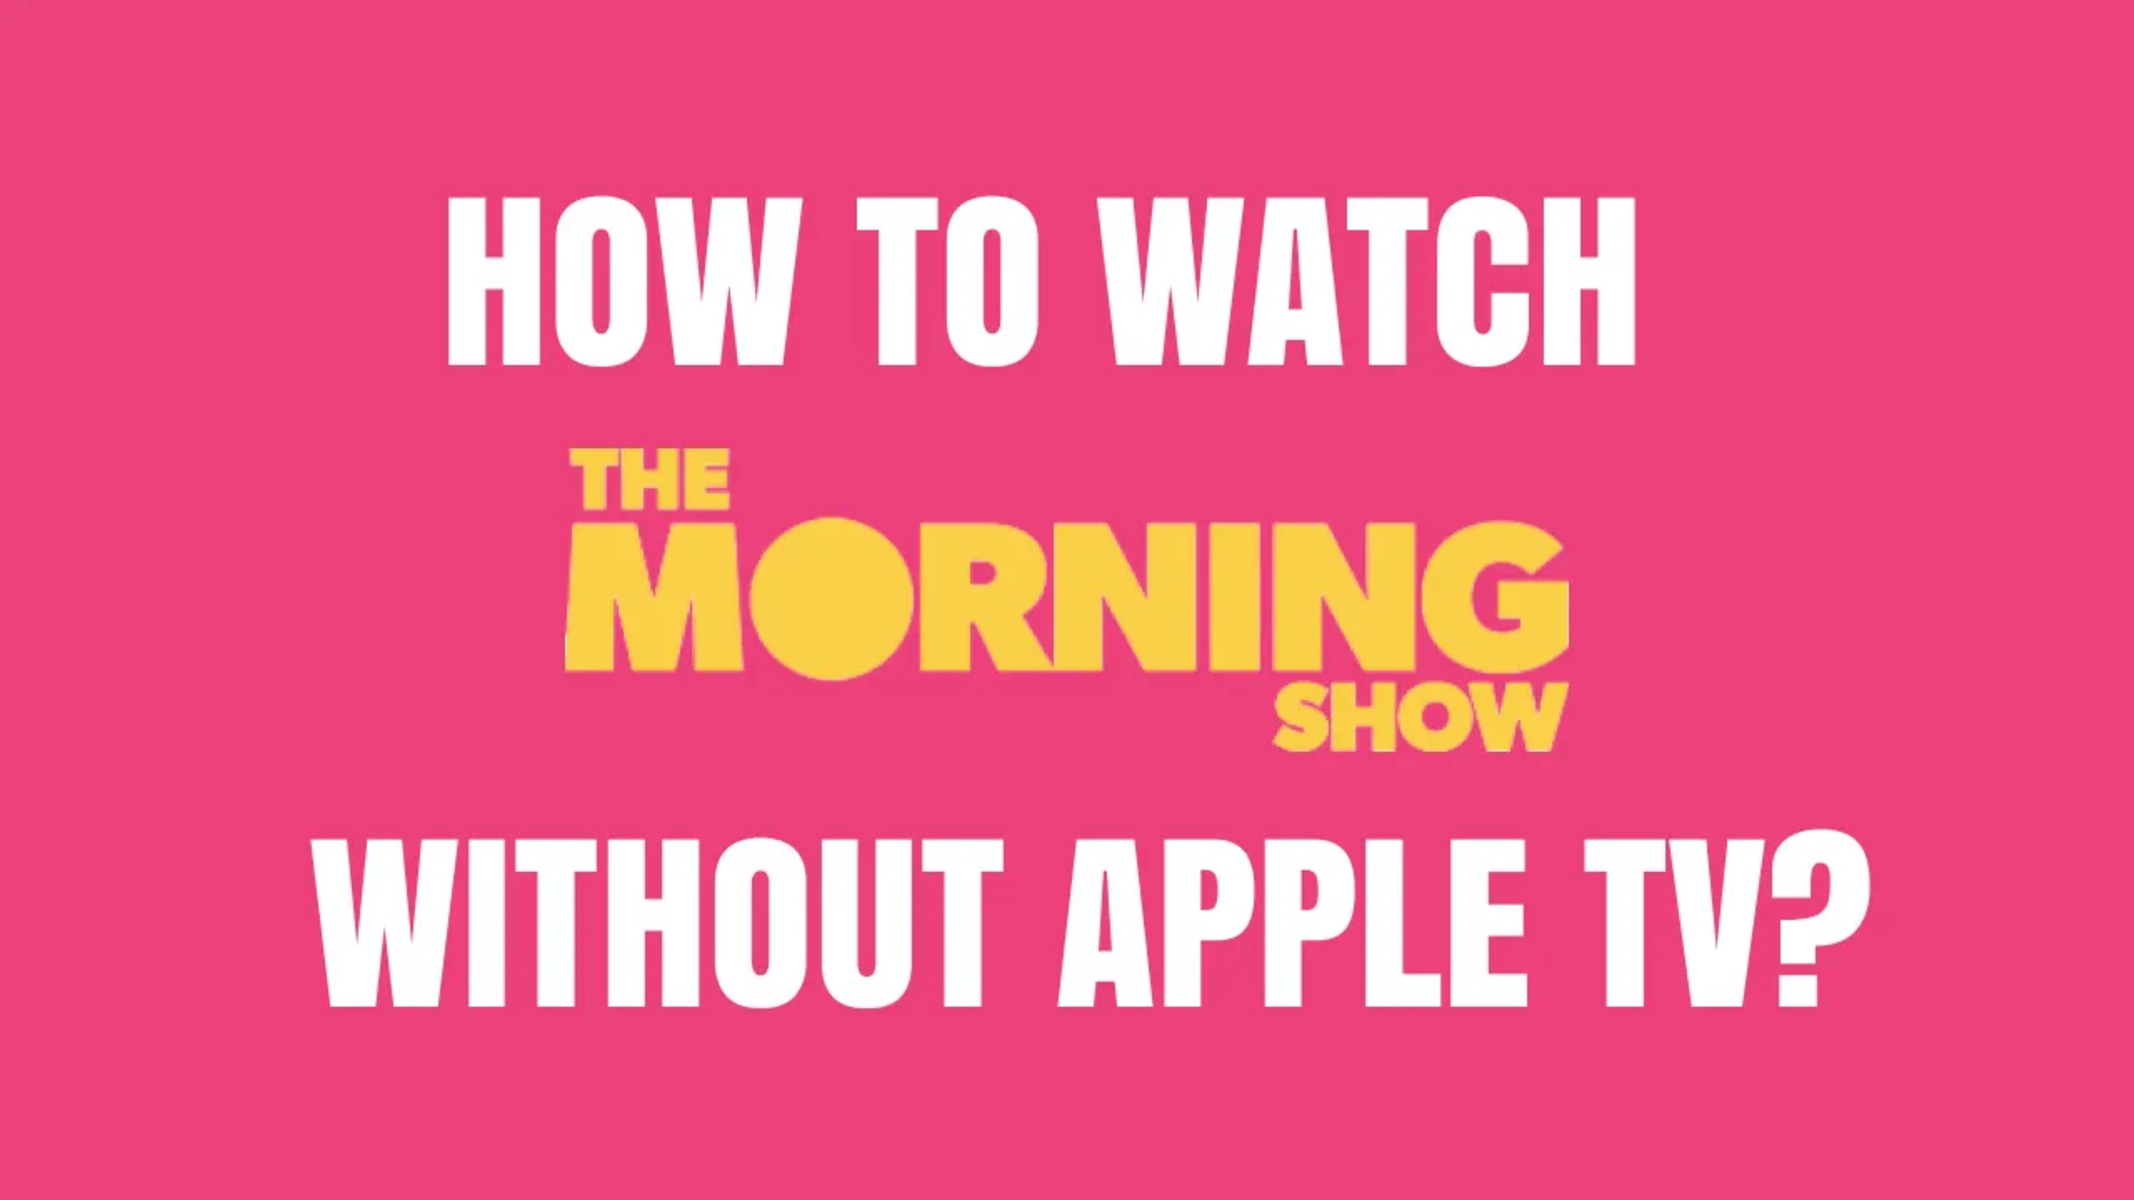 How To Watch The Morning Show Without Apple Tv+